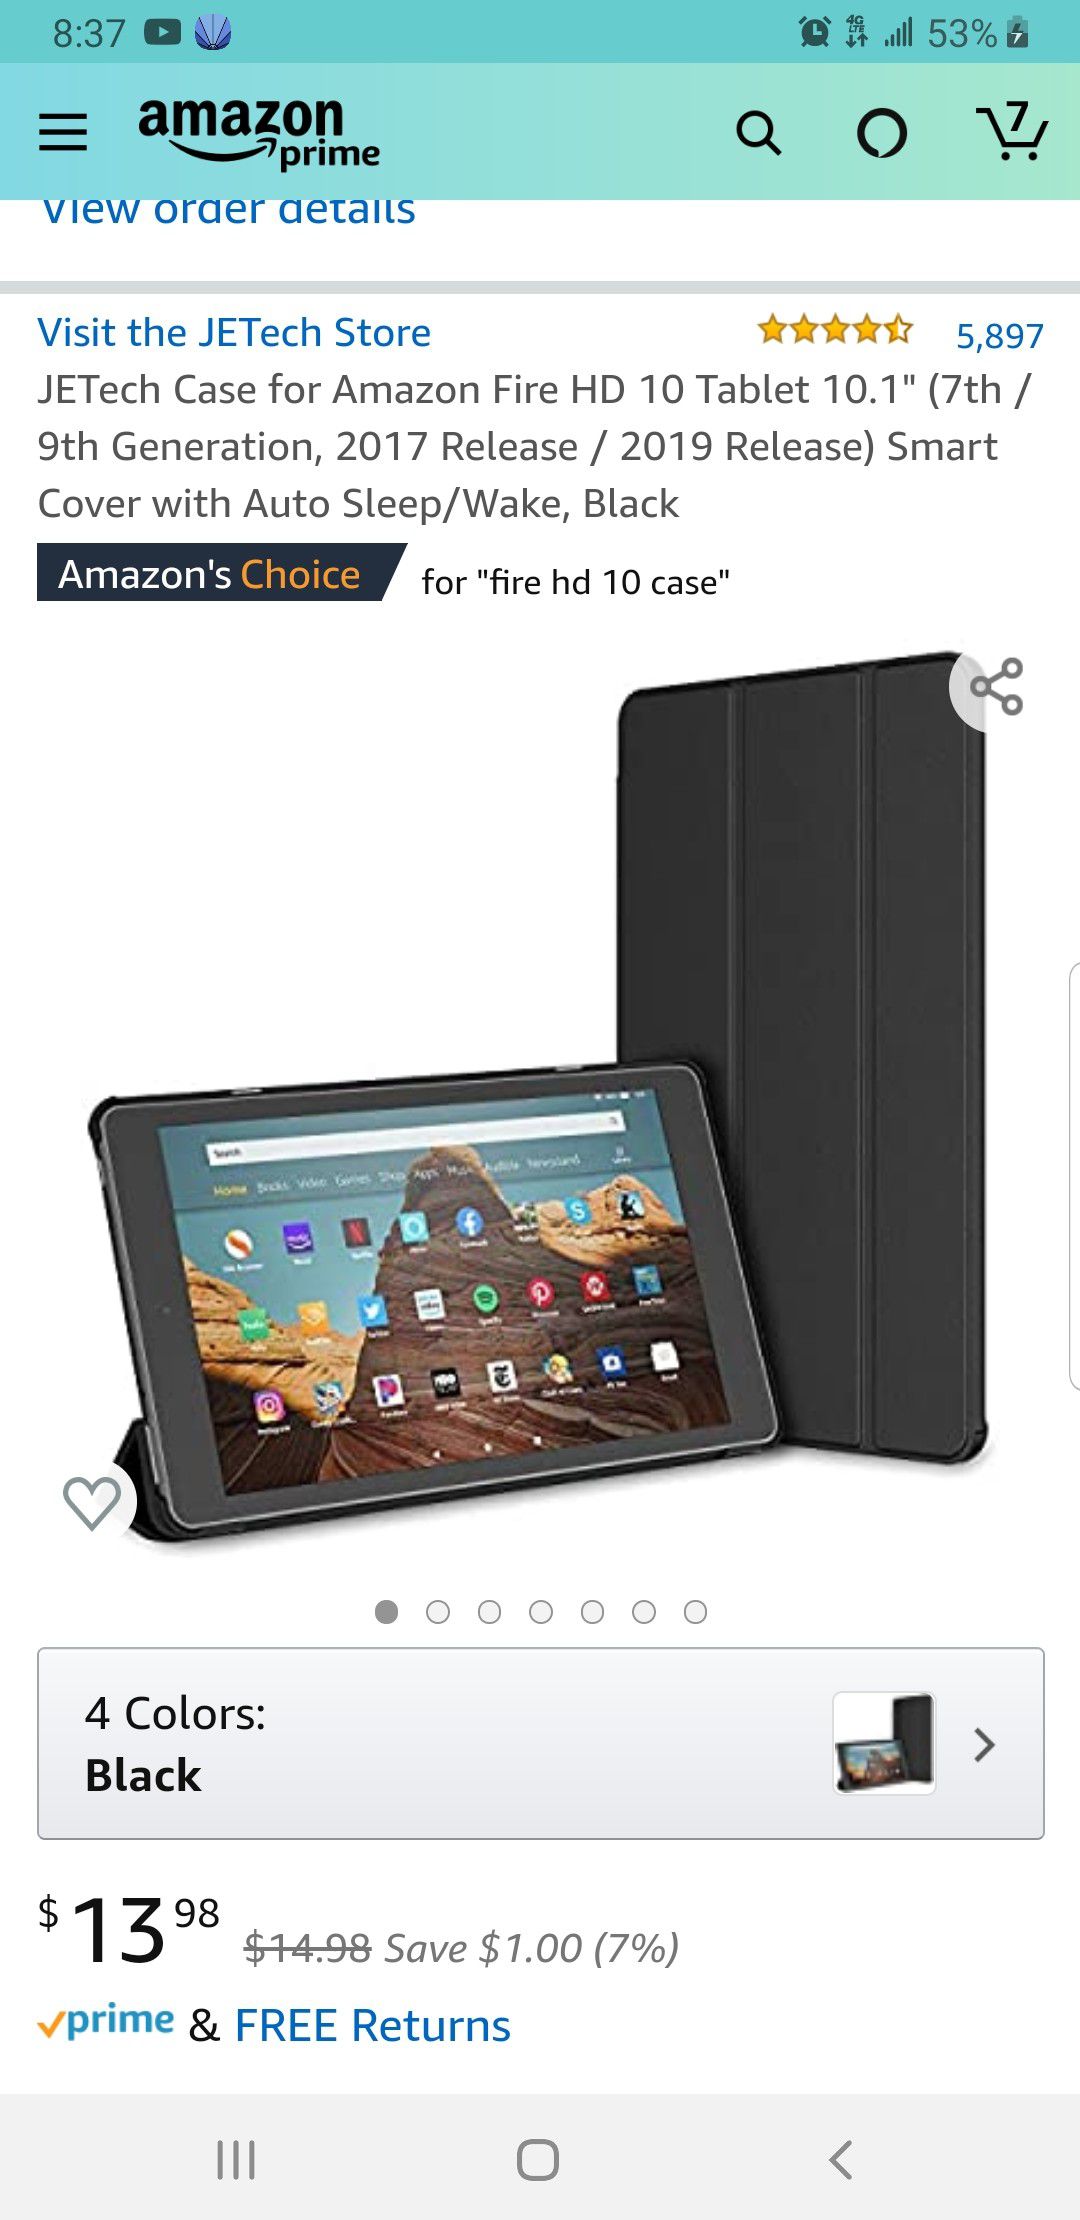 JETech Case for Amazon Fire HD 10 Tablet 10.1" (7th / 9th Generation, 2017 Release / 2019 Release)